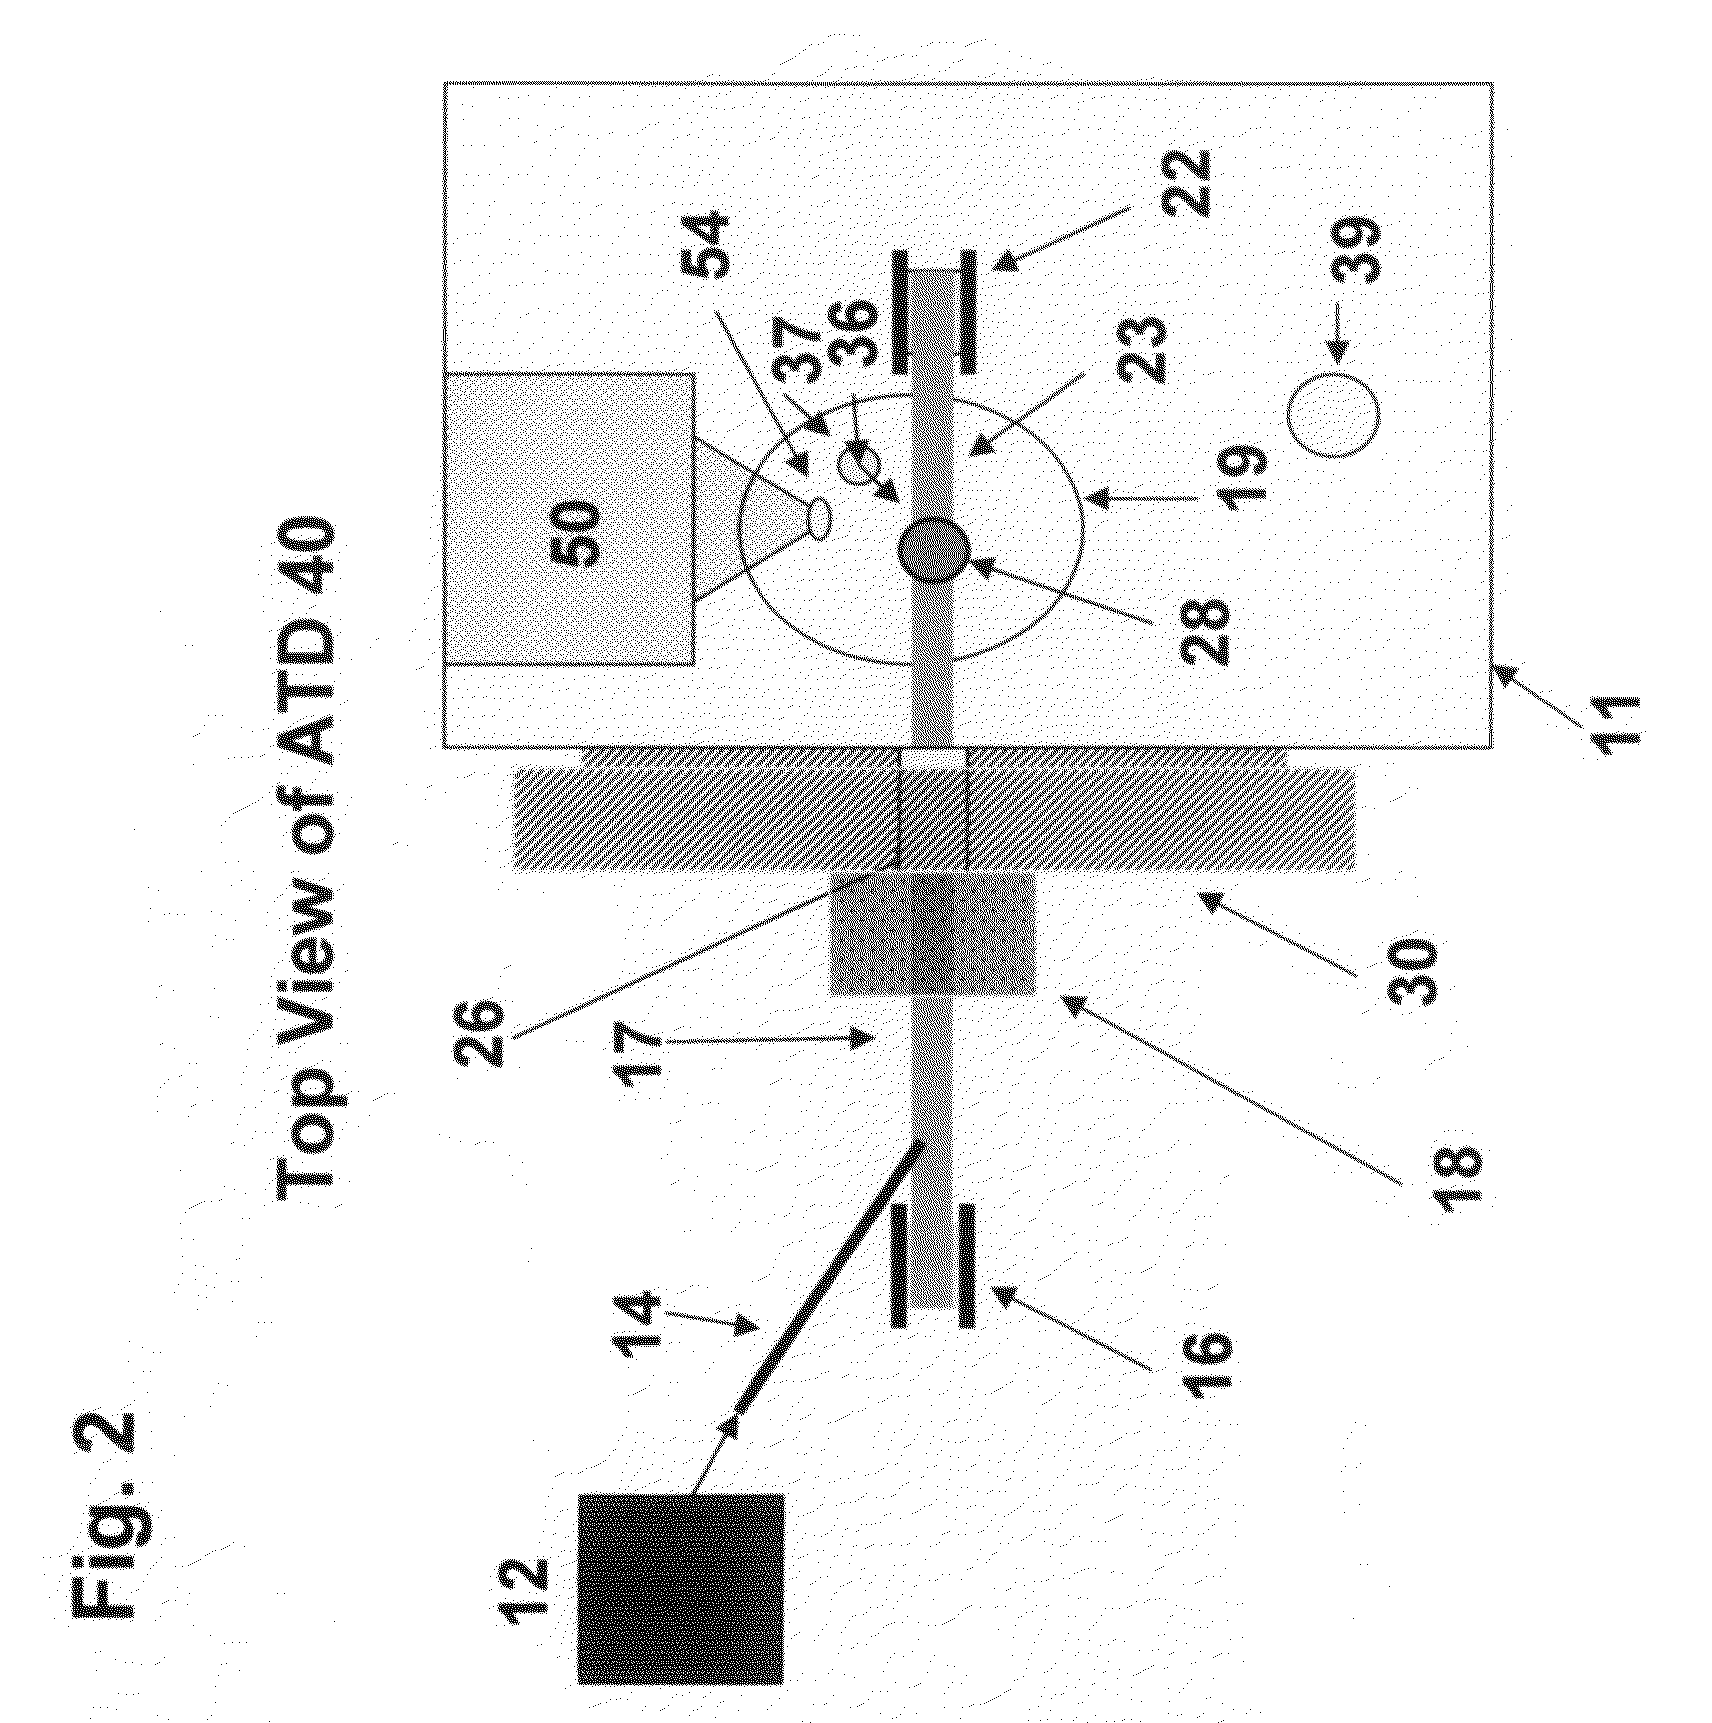 Atmospheric pressure ion source moving transport interface for a mass spectrometer